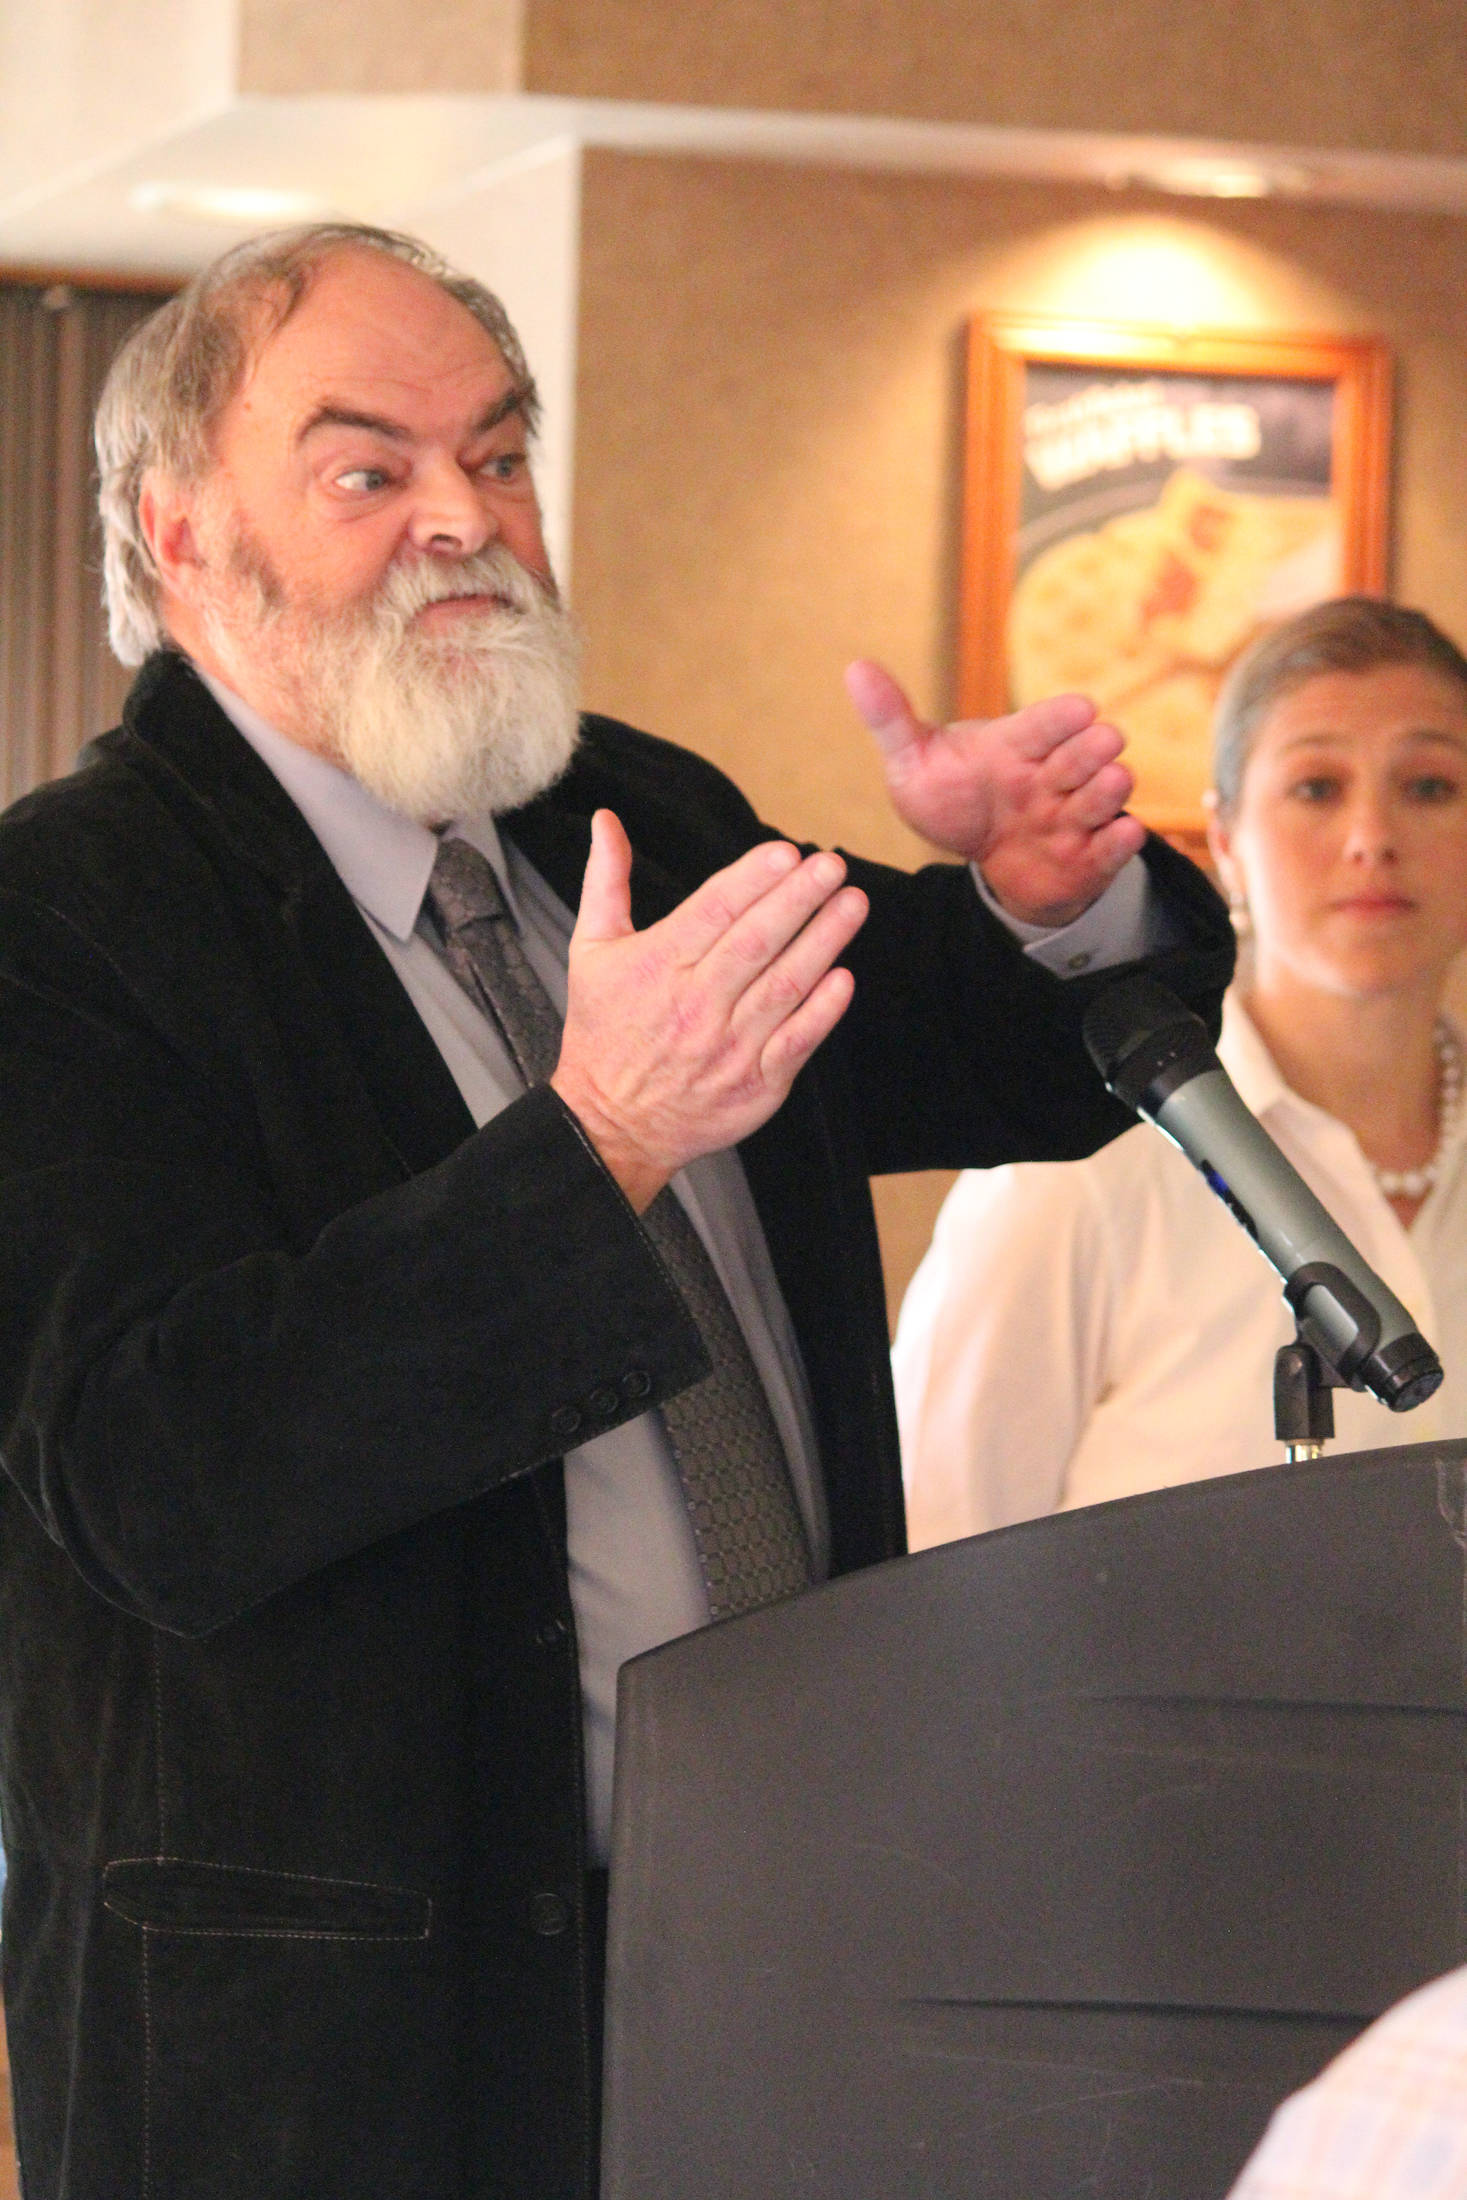 Mayor Ken Castner addresses a crowd of people at a Tuesday, March 26, 2019 Homer Chamber of Commerce meeting during a “State of the City” address at the Best Western Bidarka Inn in Homer, Alaska. (Photo by Megan Pacer/Homer News)